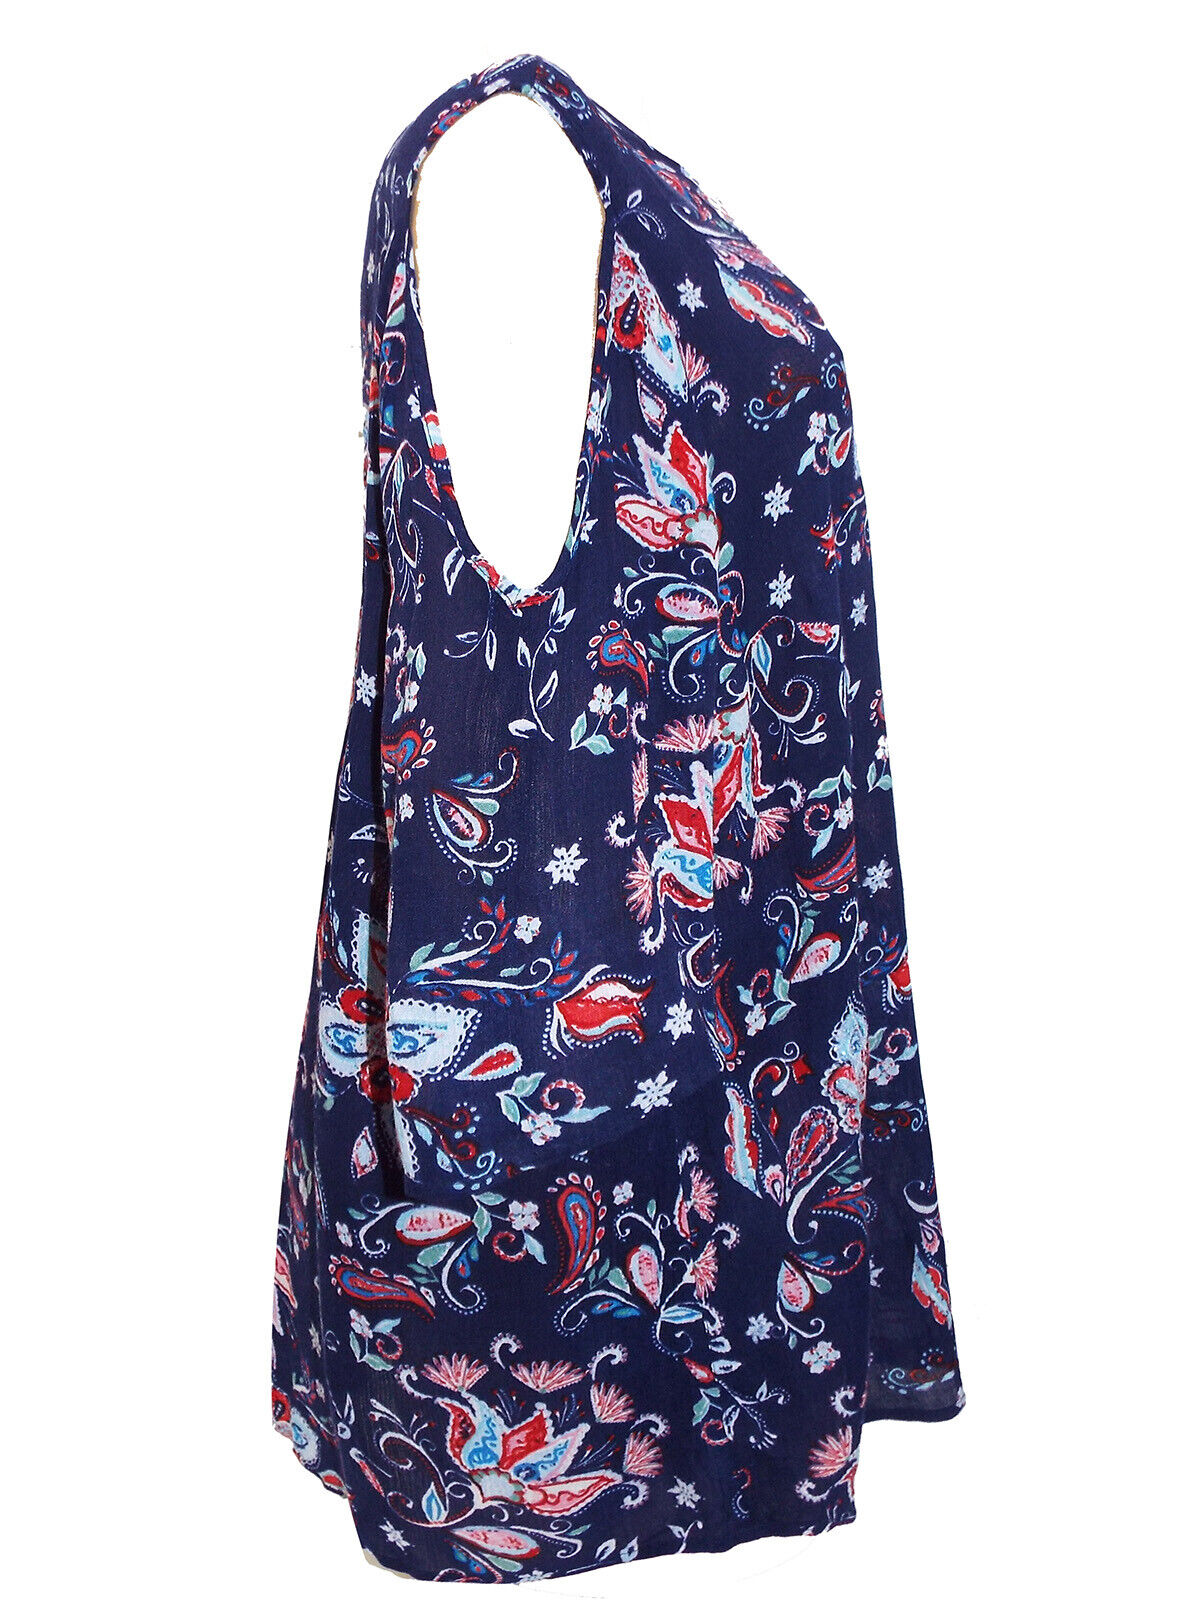 M&amp;Co Navy Floral Print Cold Shoulder Top in Plus Sizes 20 or 24 RRP£26